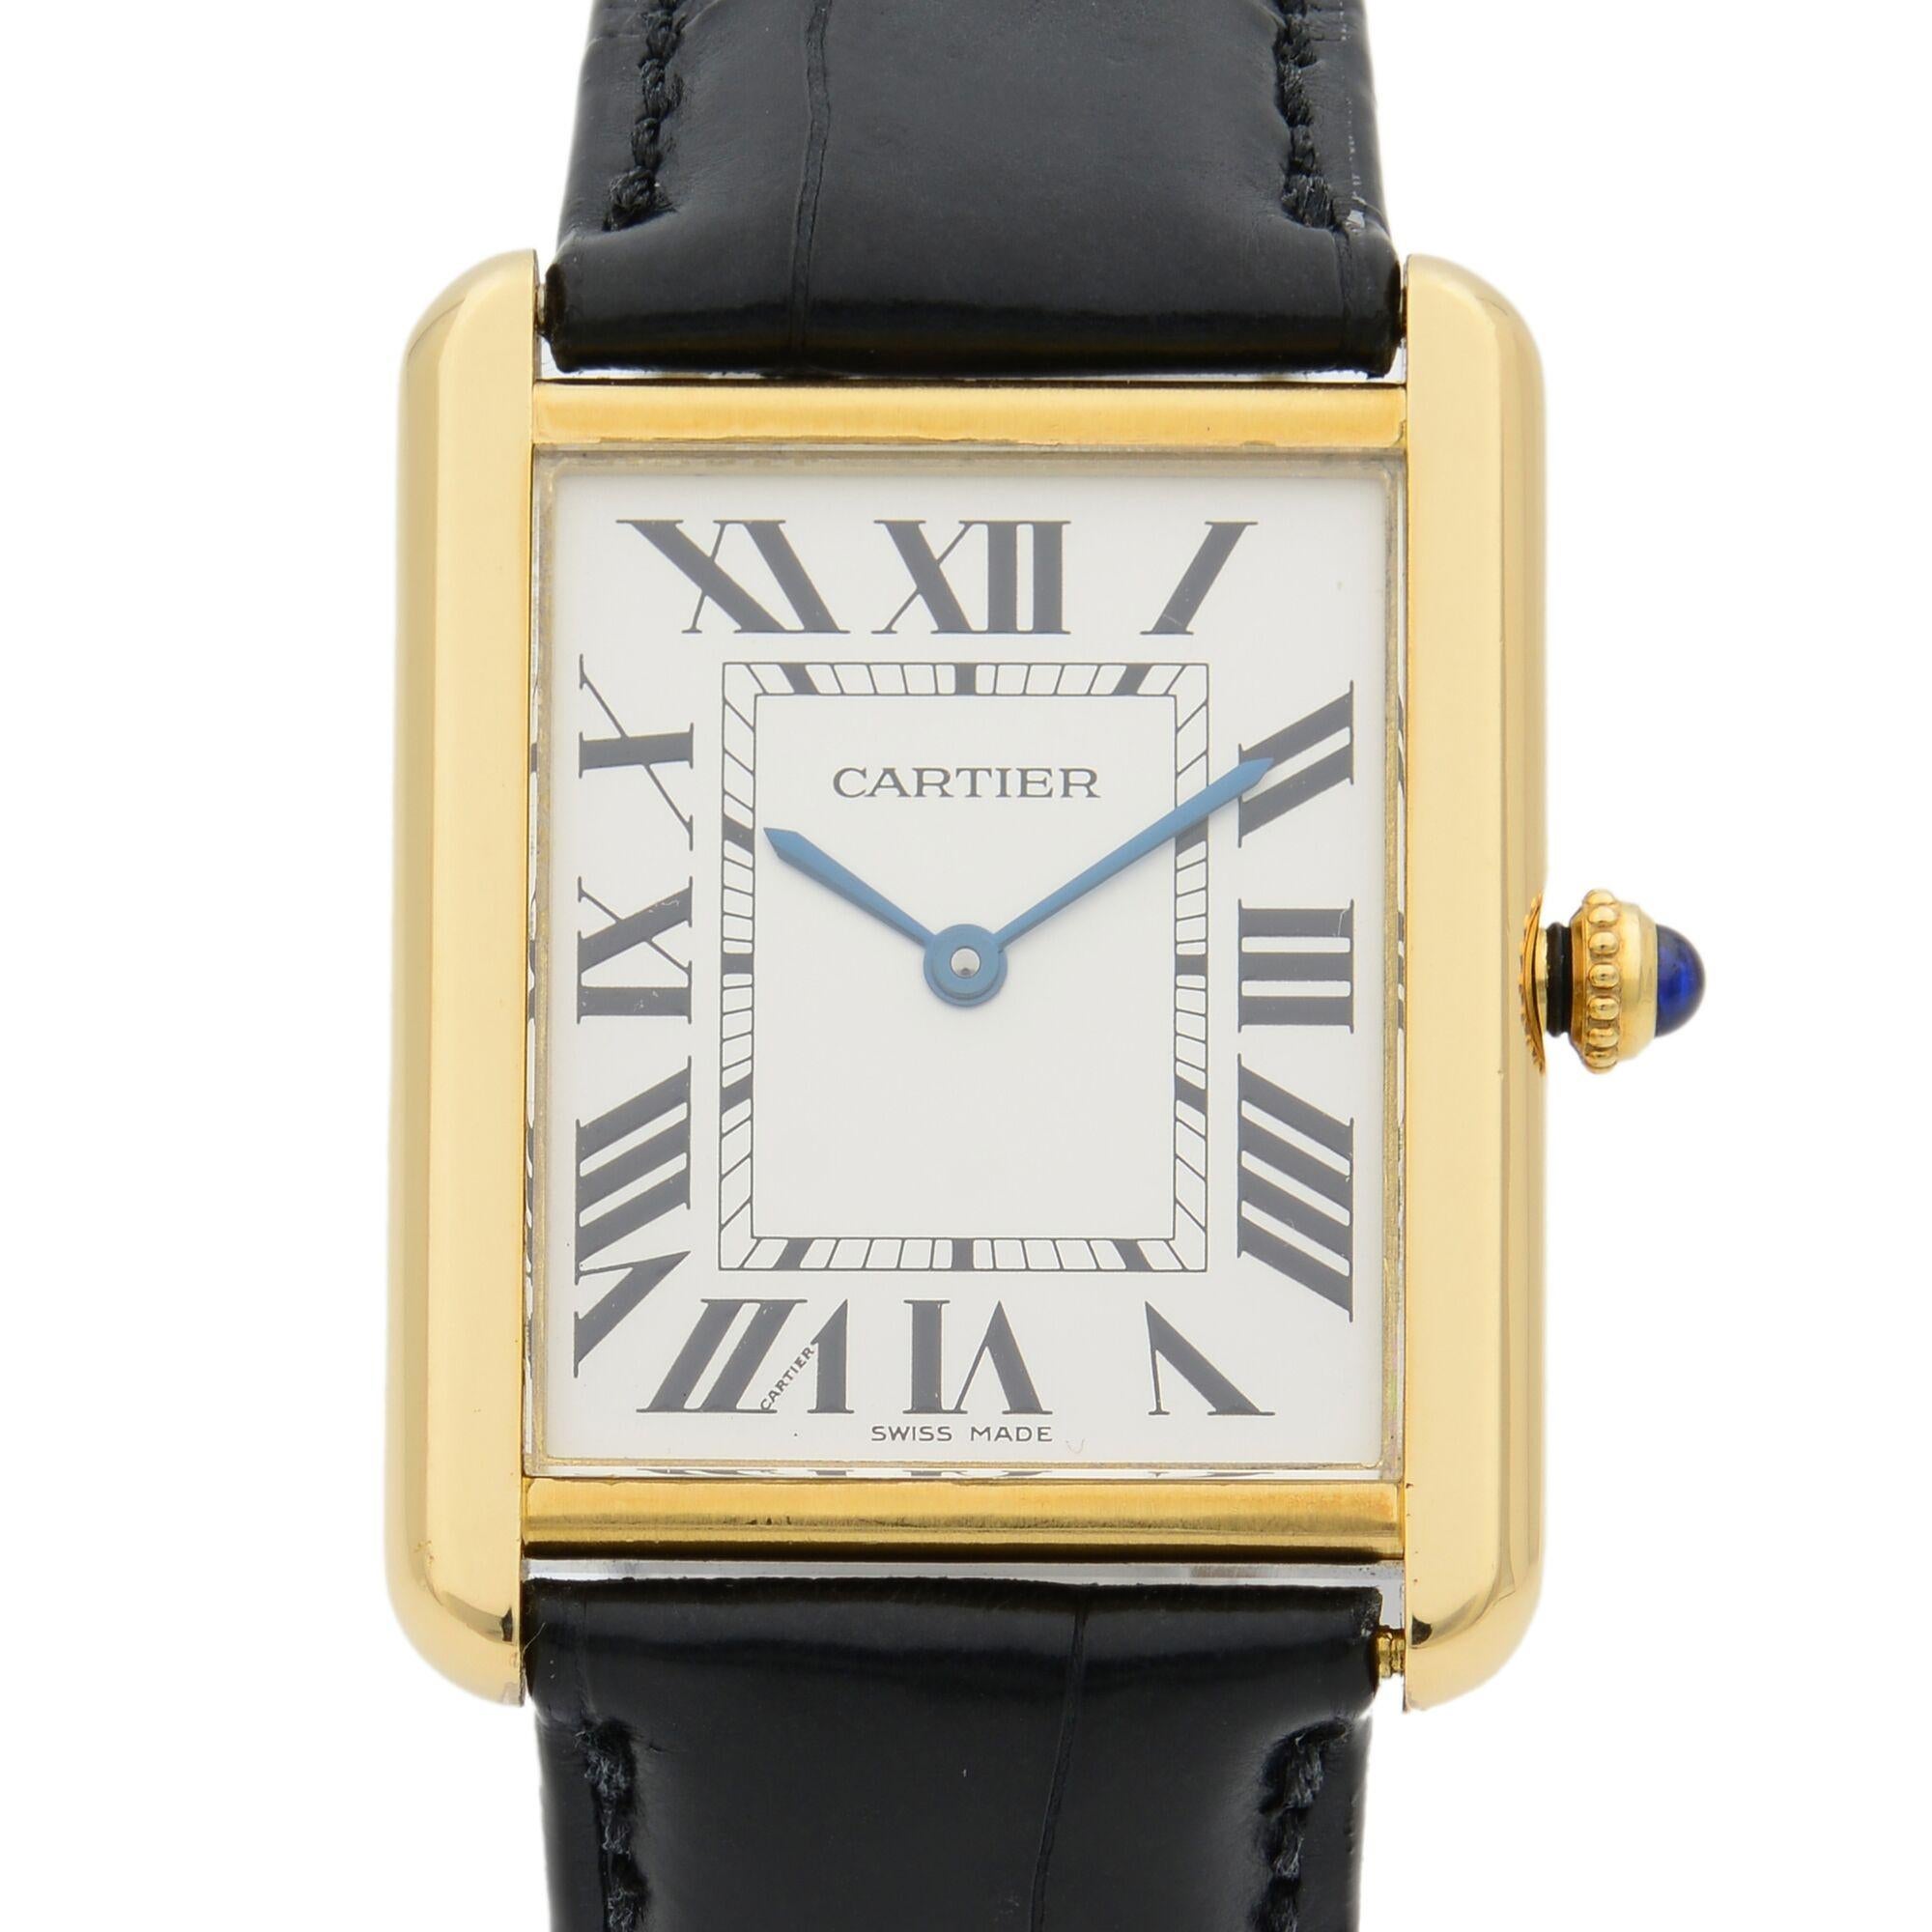 This pre-owned Cartier Tank W5200004  is a beautiful Ladie's timepiece that is powered by quartz (battery) movement which is cased in a yellow gold case. It has a  rectangle shape face, no features dial and has hand roman numerals style markers. It